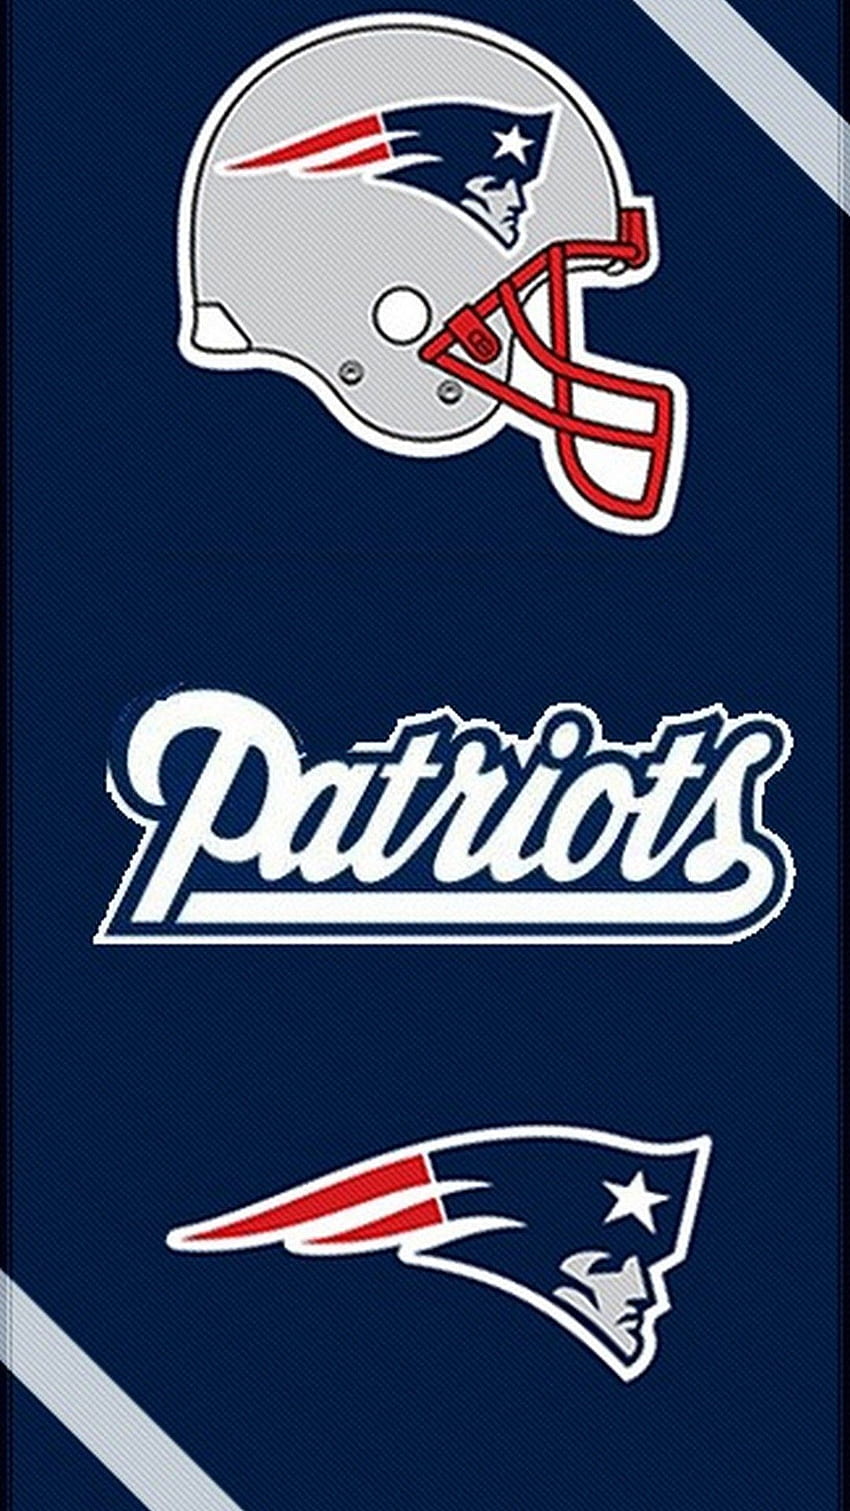 Aggregate more than 64 patriots wallpaper iphone - in.cdgdbentre